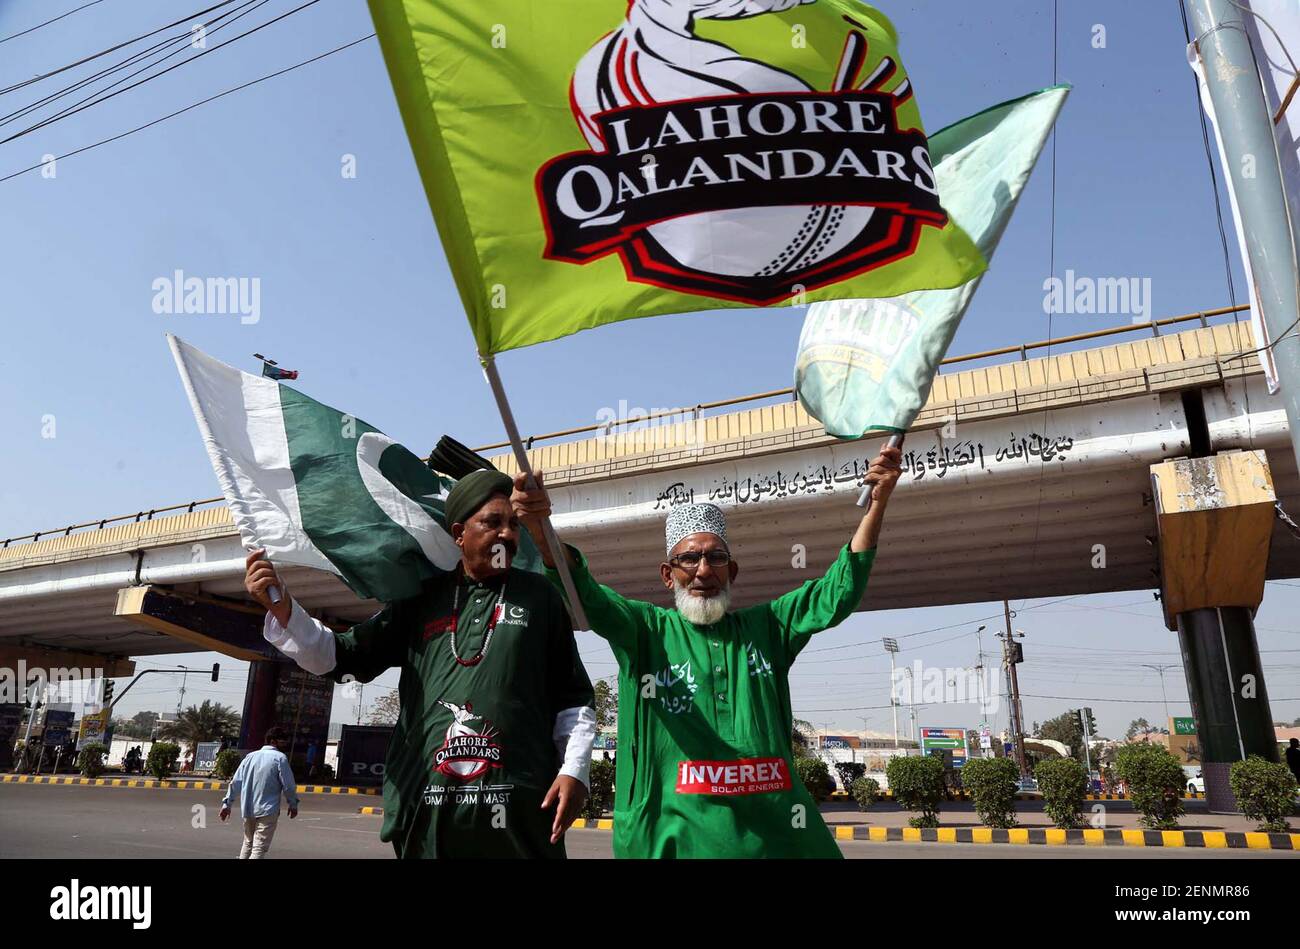 Cricket lovers are showing their zeal, who come to watch the Pakistan Super League (PSL-VI) T20 match between Multan Sultans and Lahore Qalandars, at National Stadium in Karachi on Friday, February 26,